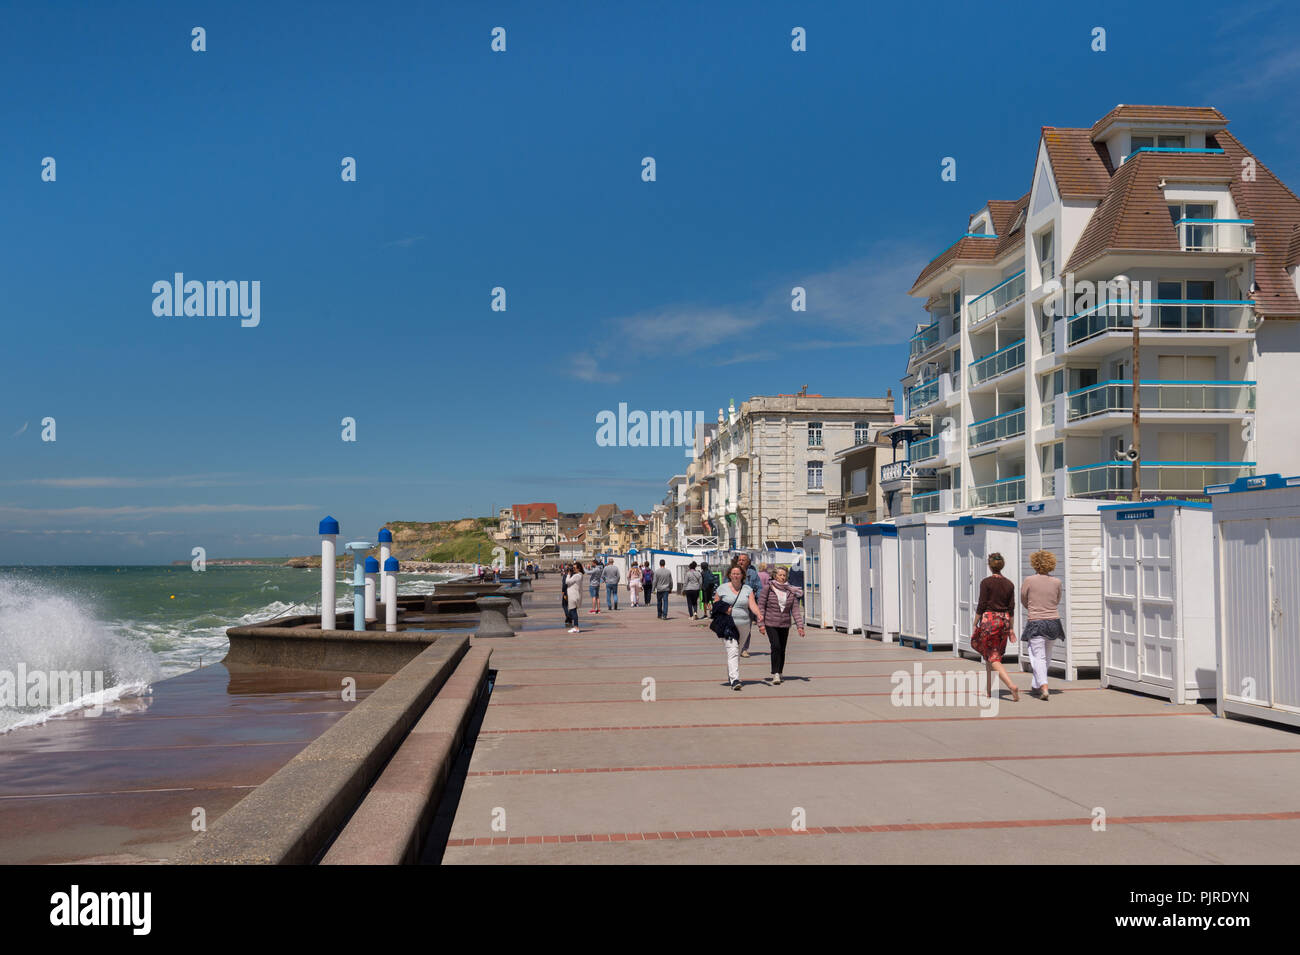 Wimereux, France - 16 June 2018: People walking on the sea front promenade Stock Photo